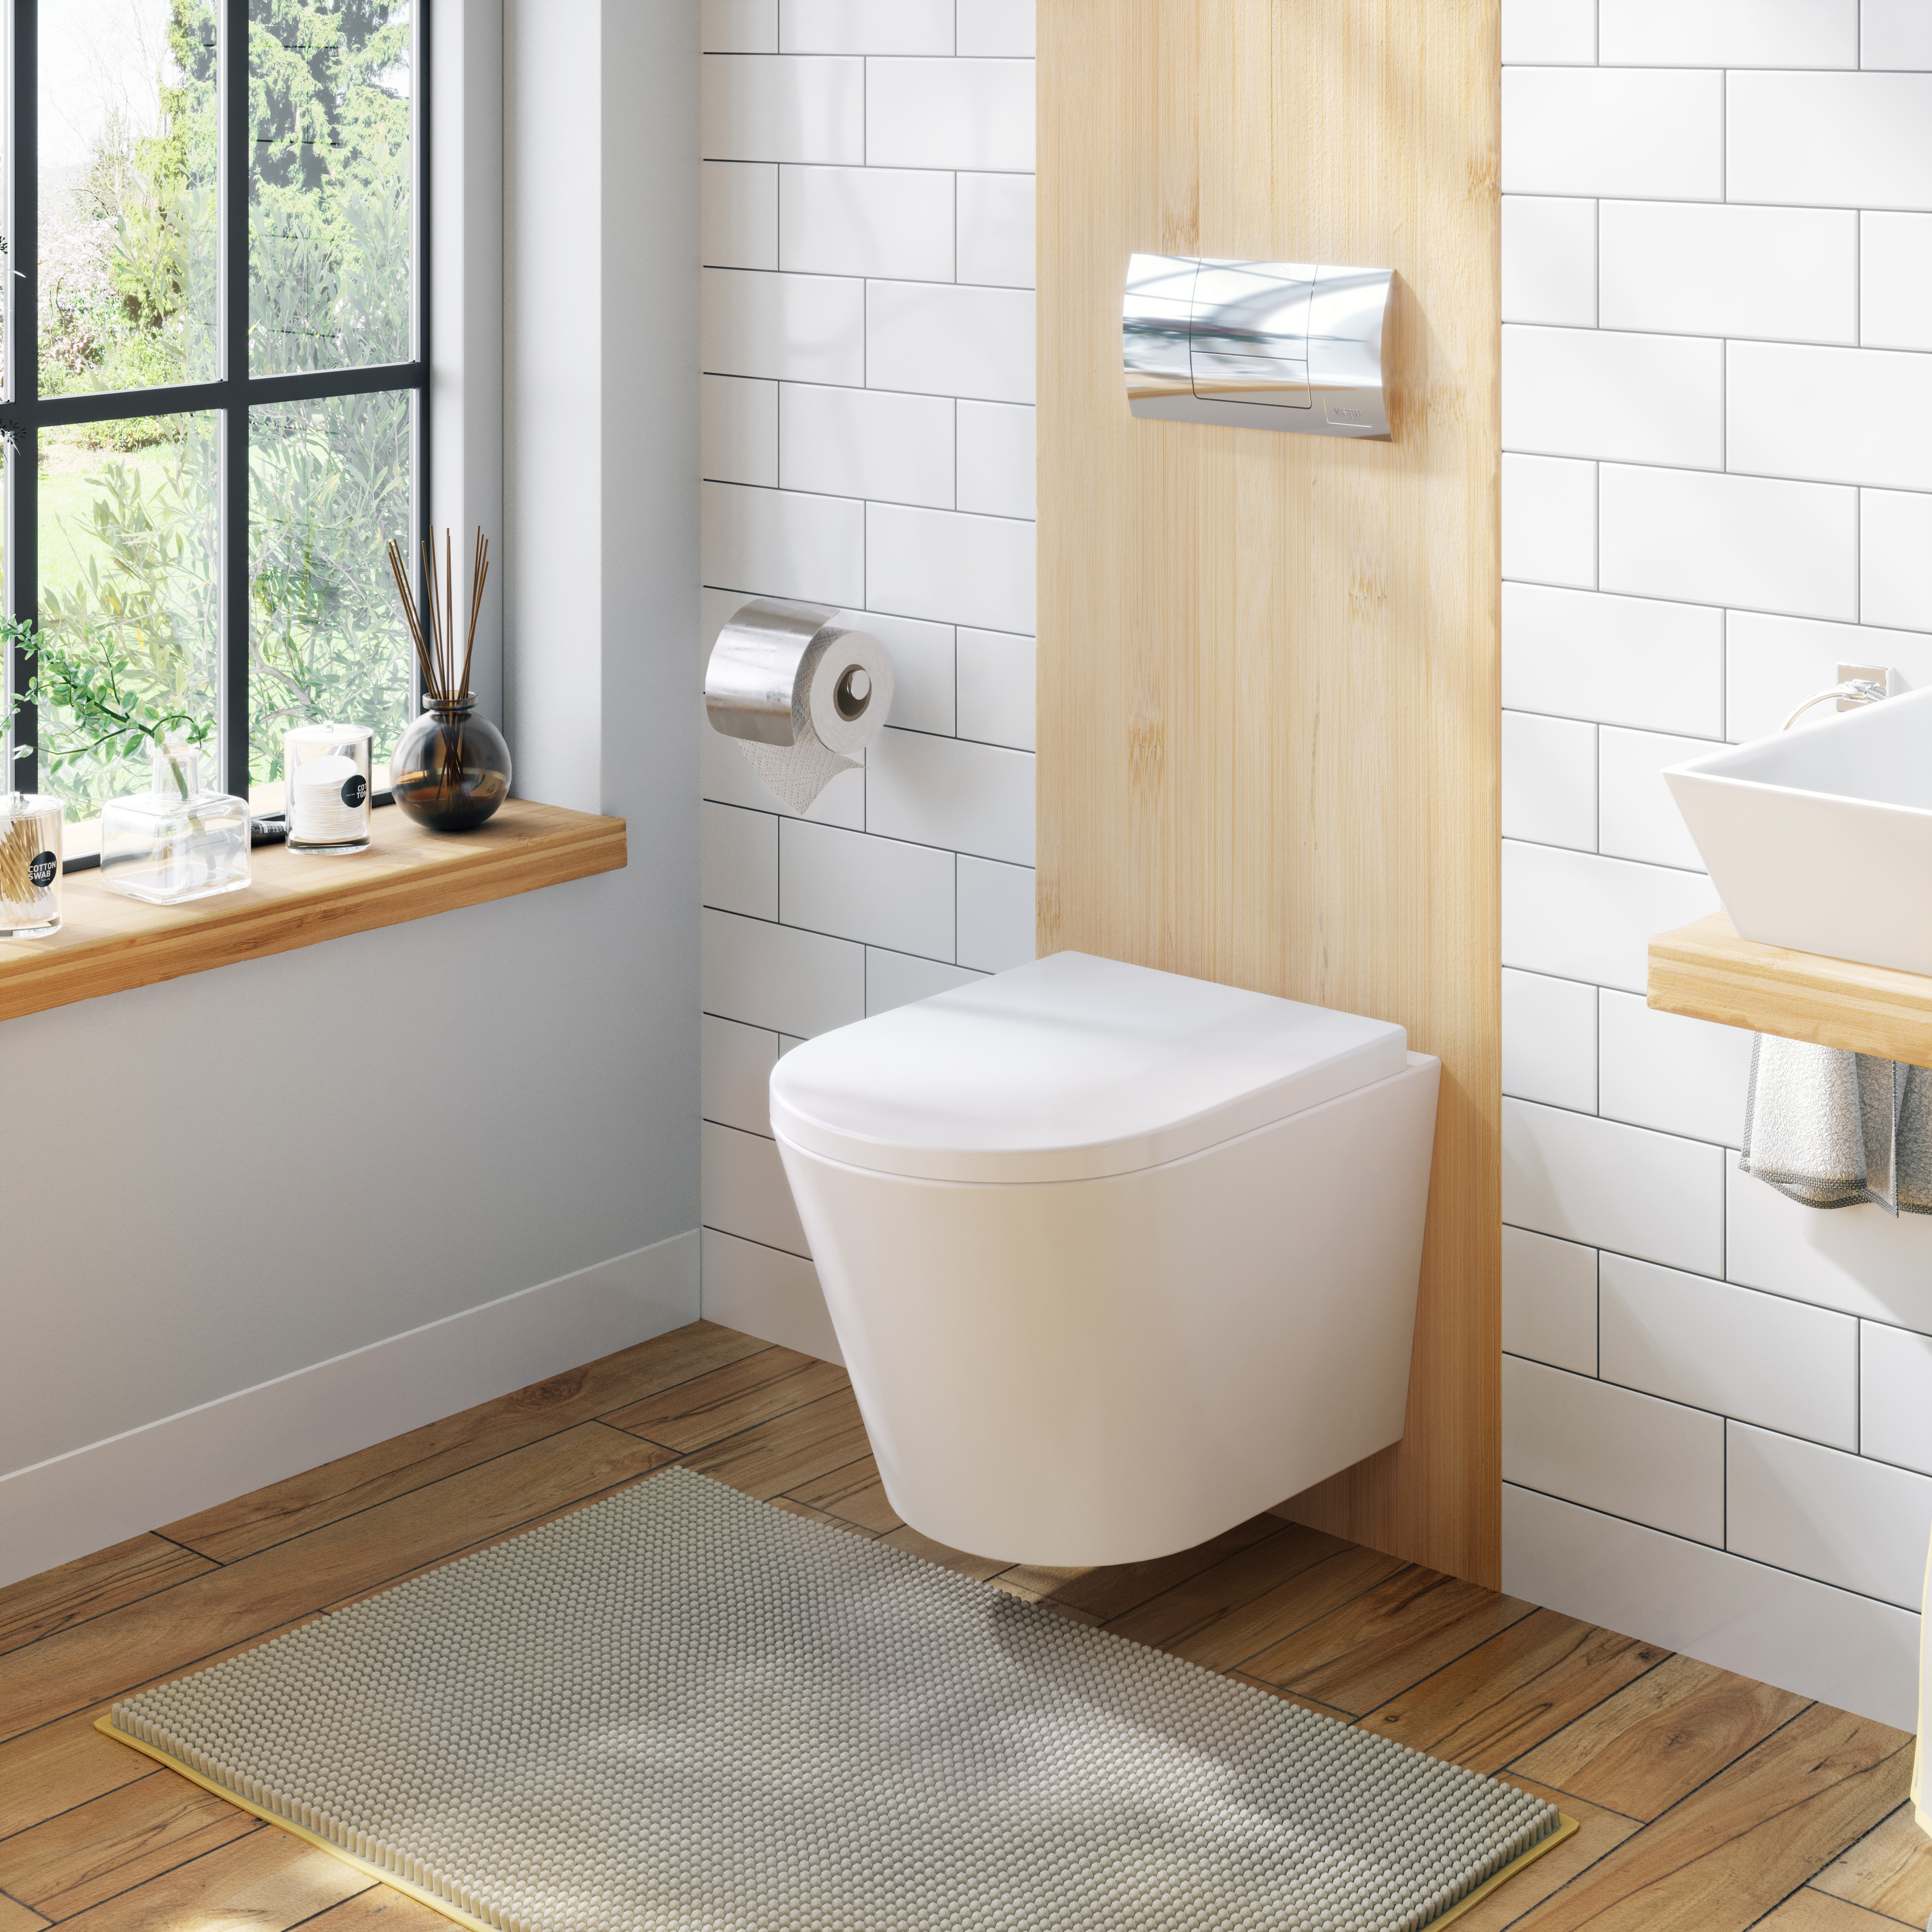 Toto Wall Hung Toilet Offer Save Jlcatj Gob Mx